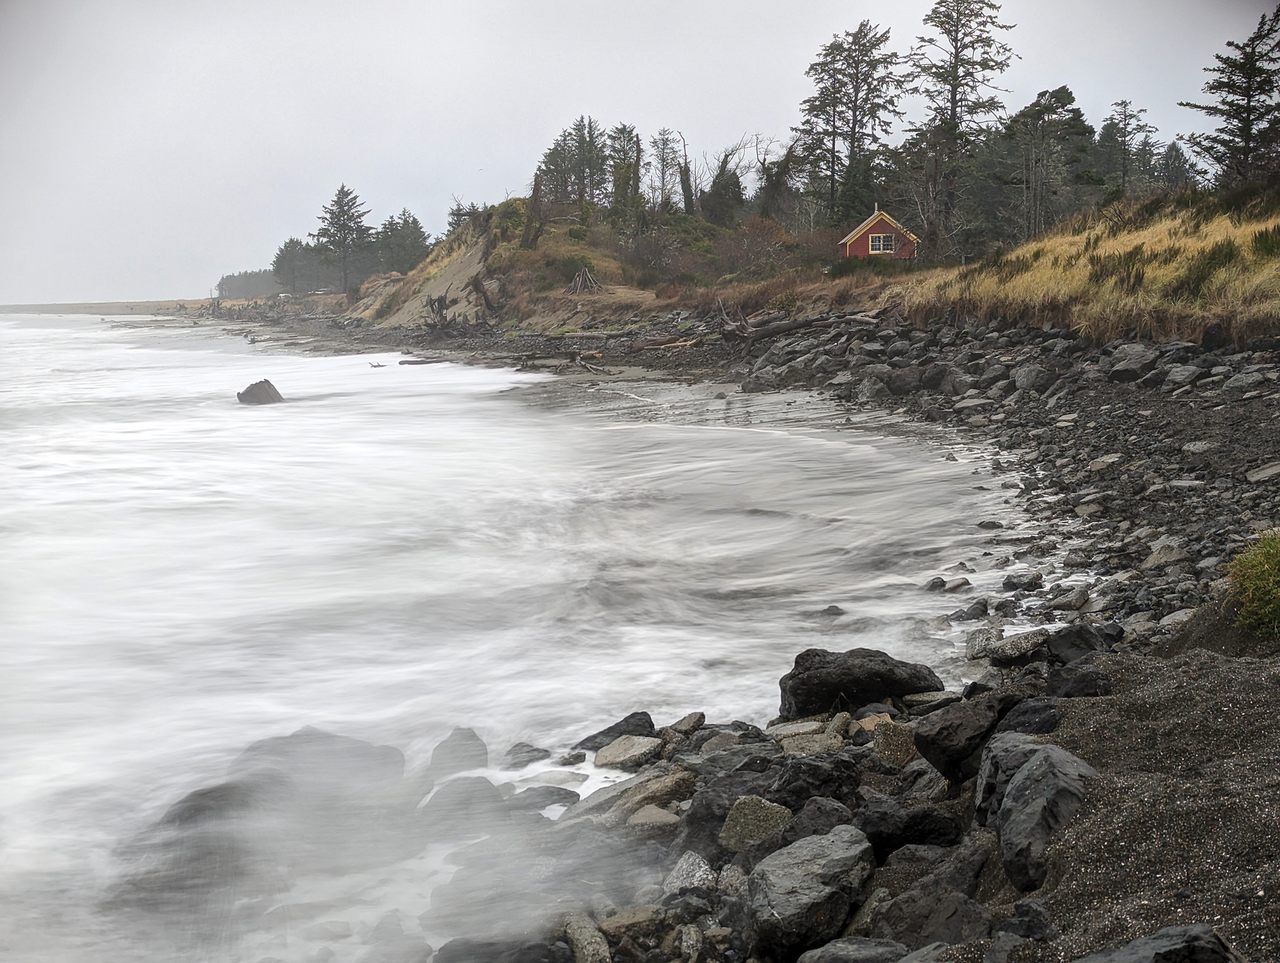 Washington’s seasonal king tides, shown here at Washaway Beach in November 2022, are becoming more destructive as sea levels rise. Local leaders have spread an experimental cobble berm along the shore to help stem erosion